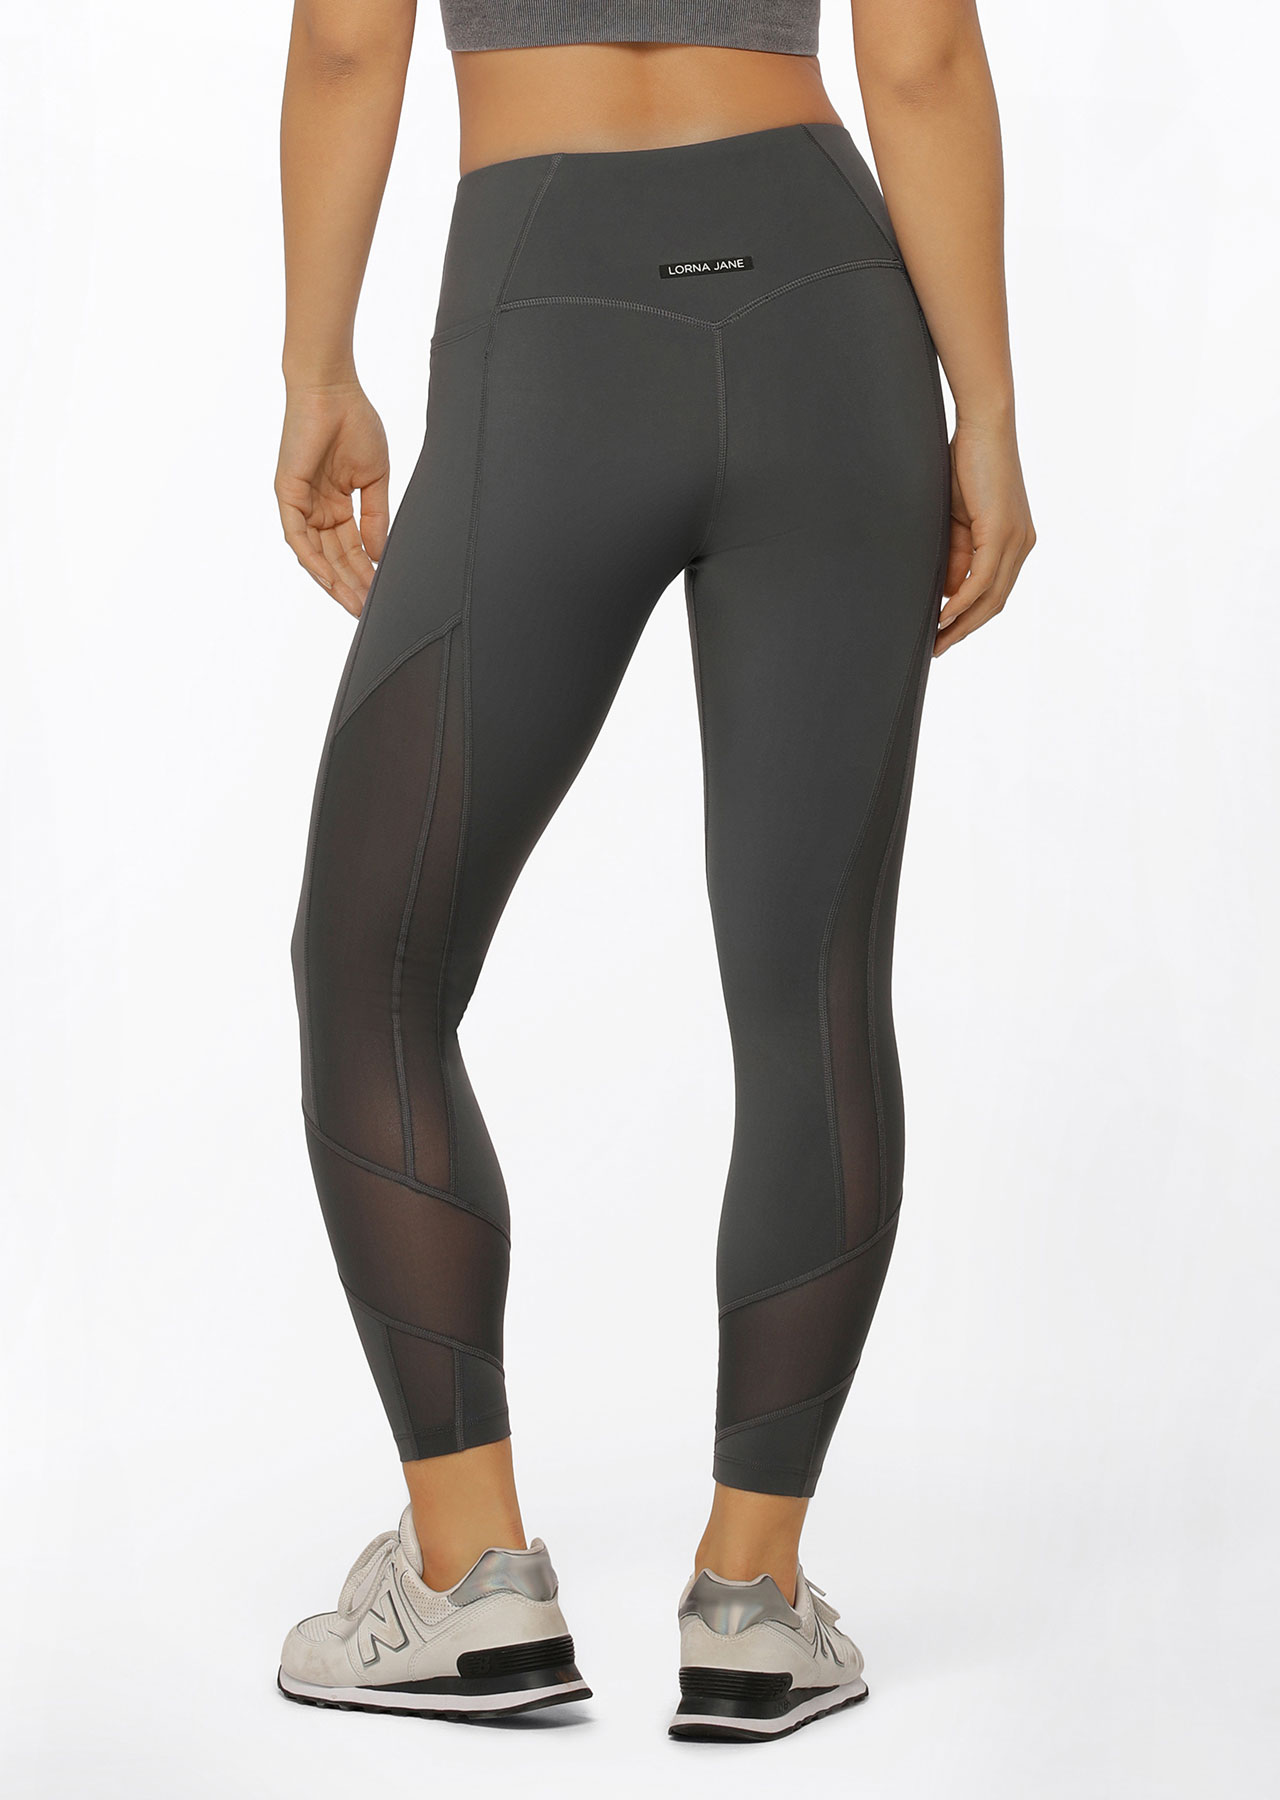 Total Knockout Tight - Smooth and Supportive Leggings